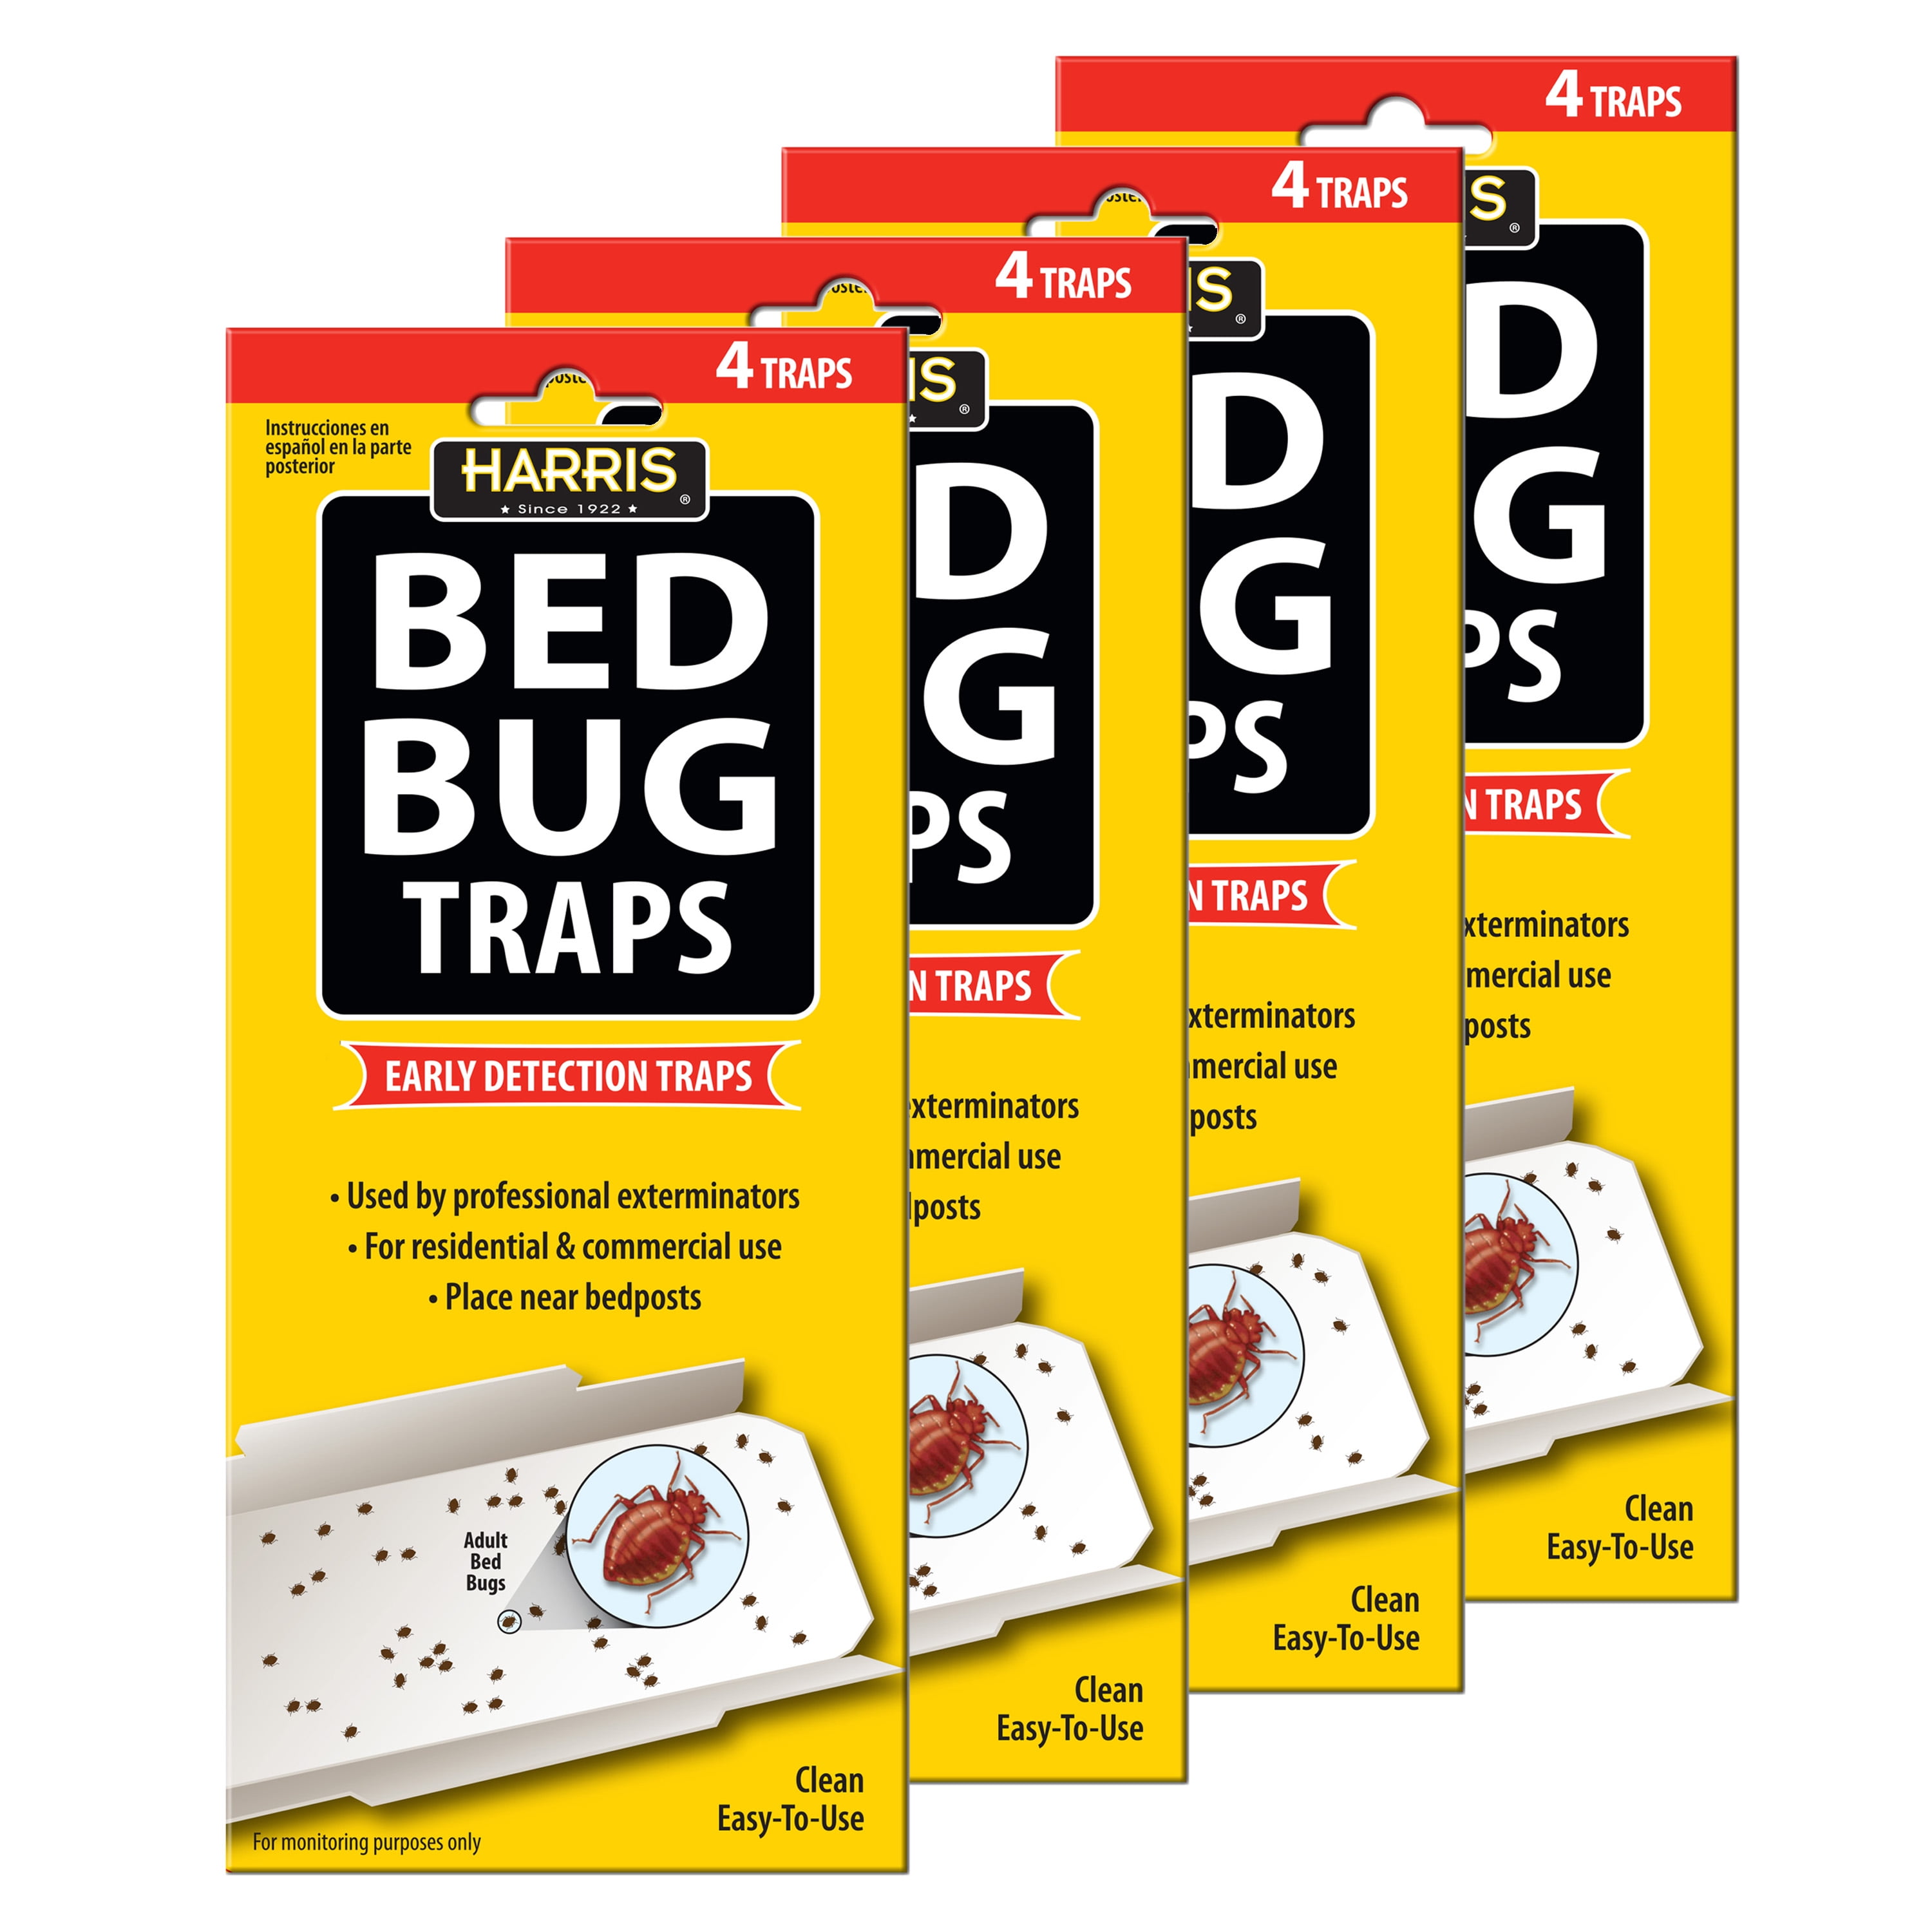 The Bed Bug Traps – bugmd